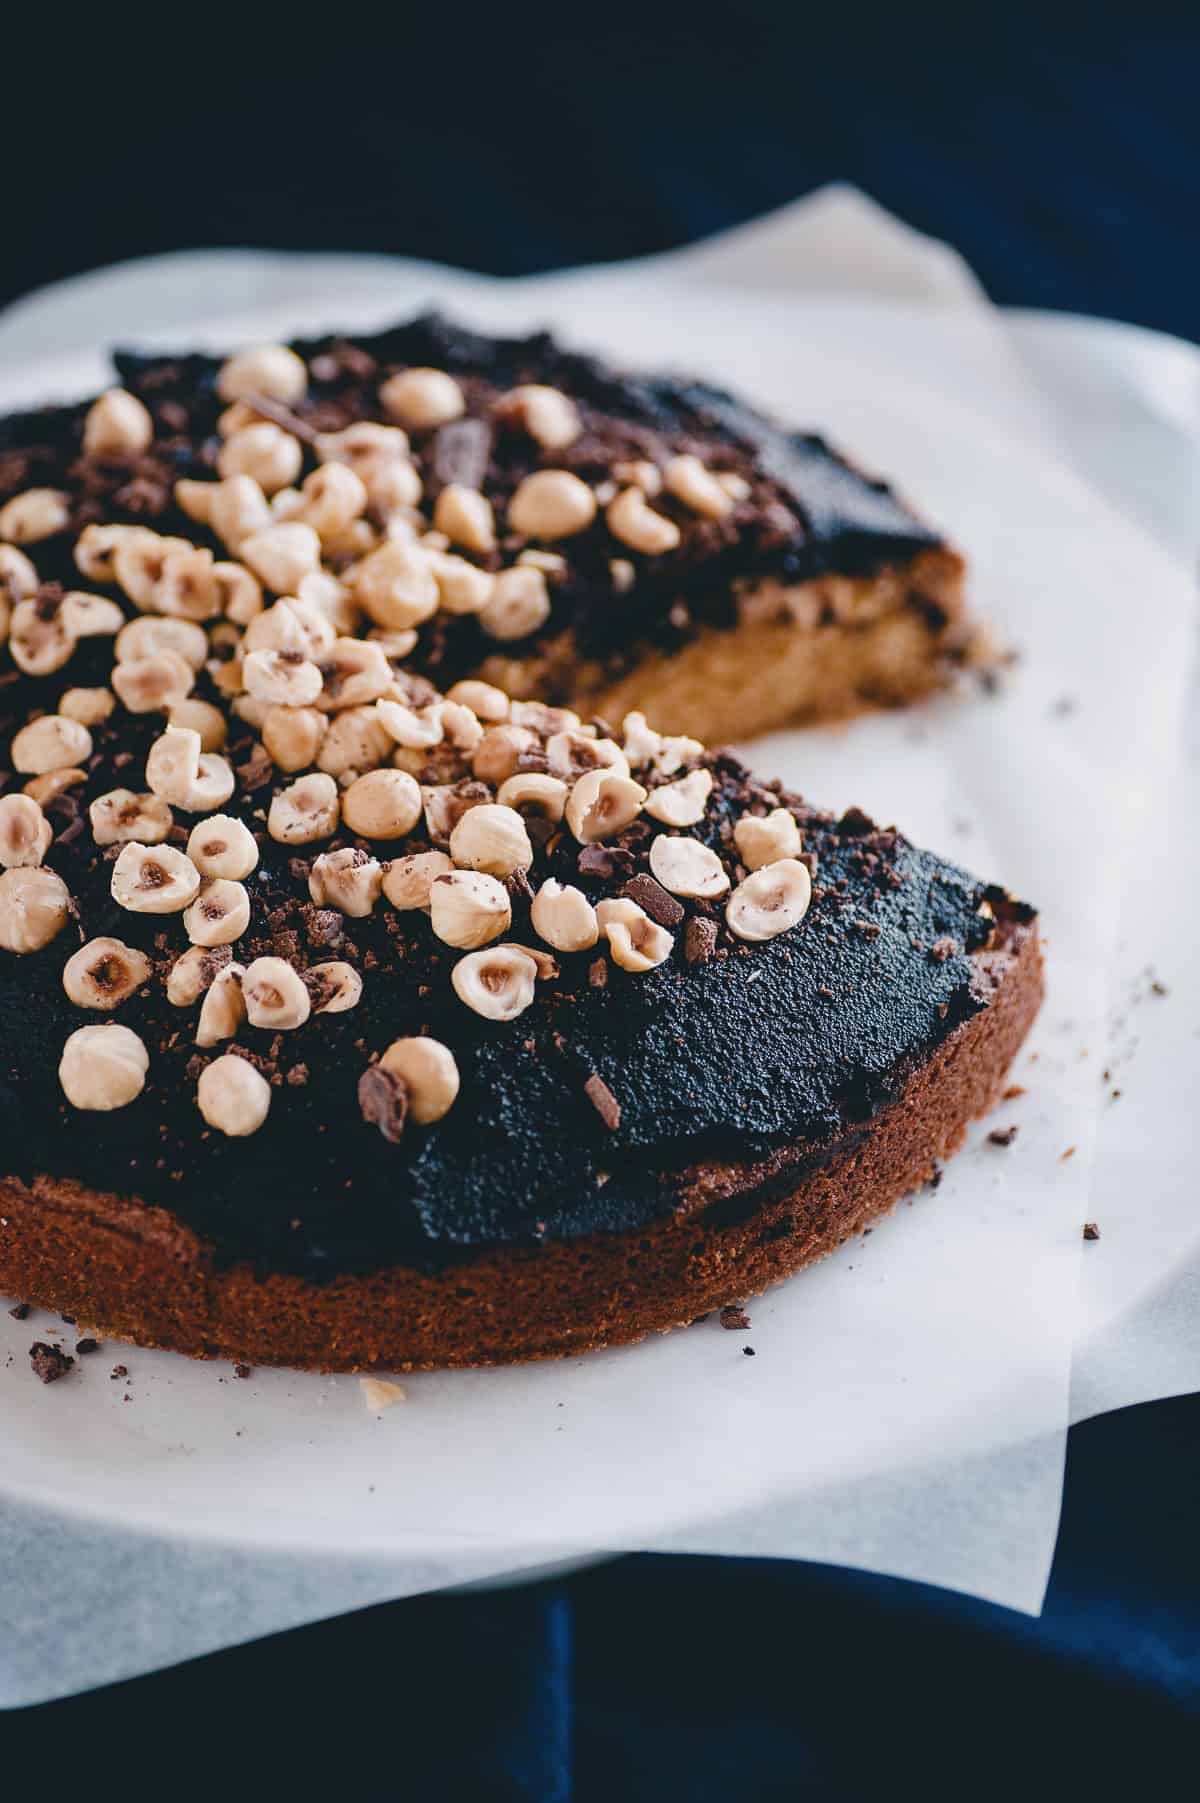 a cake topped with a chocolate spread and raw hazelnuts